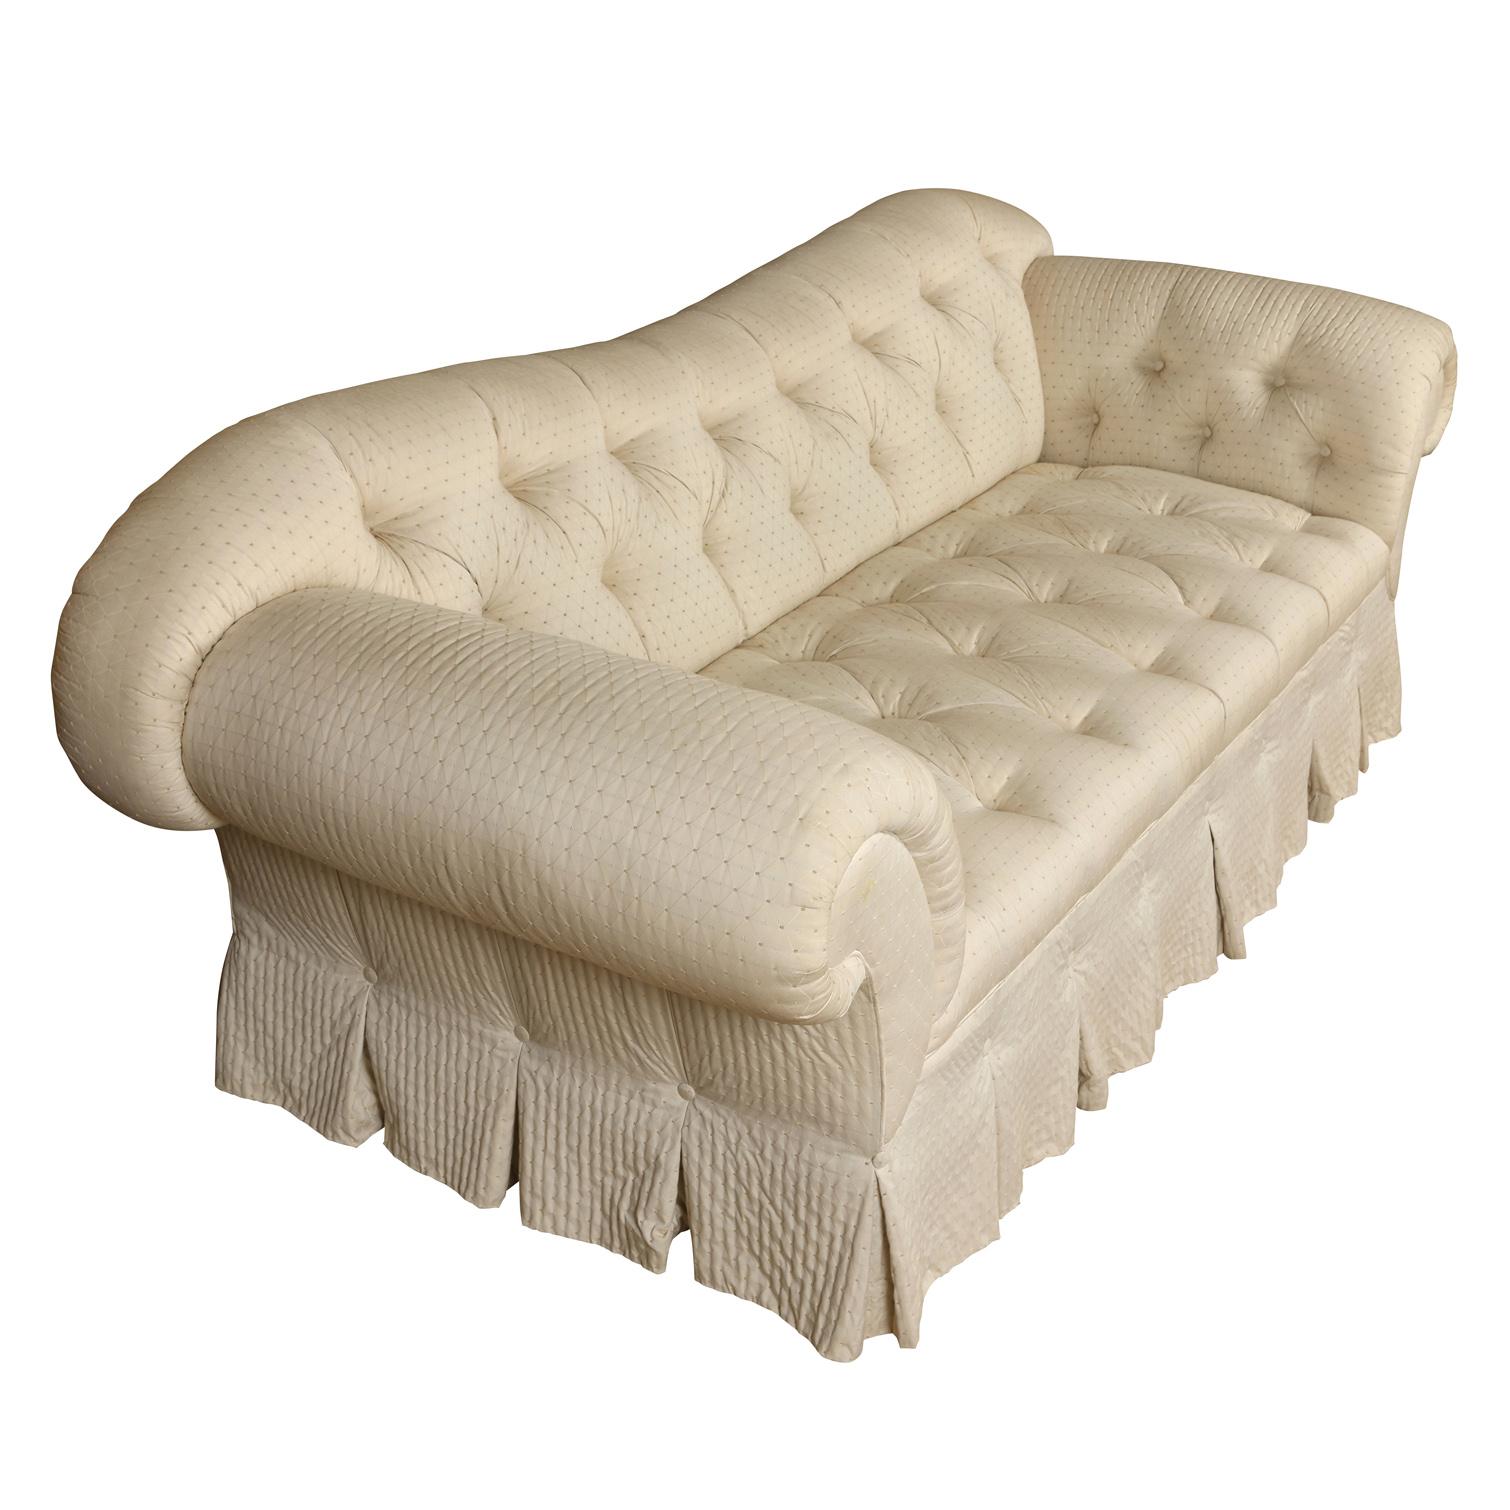 Large Baker tufted upholstered ivory English sofa with shaped back, roll arms and pleated skirt.